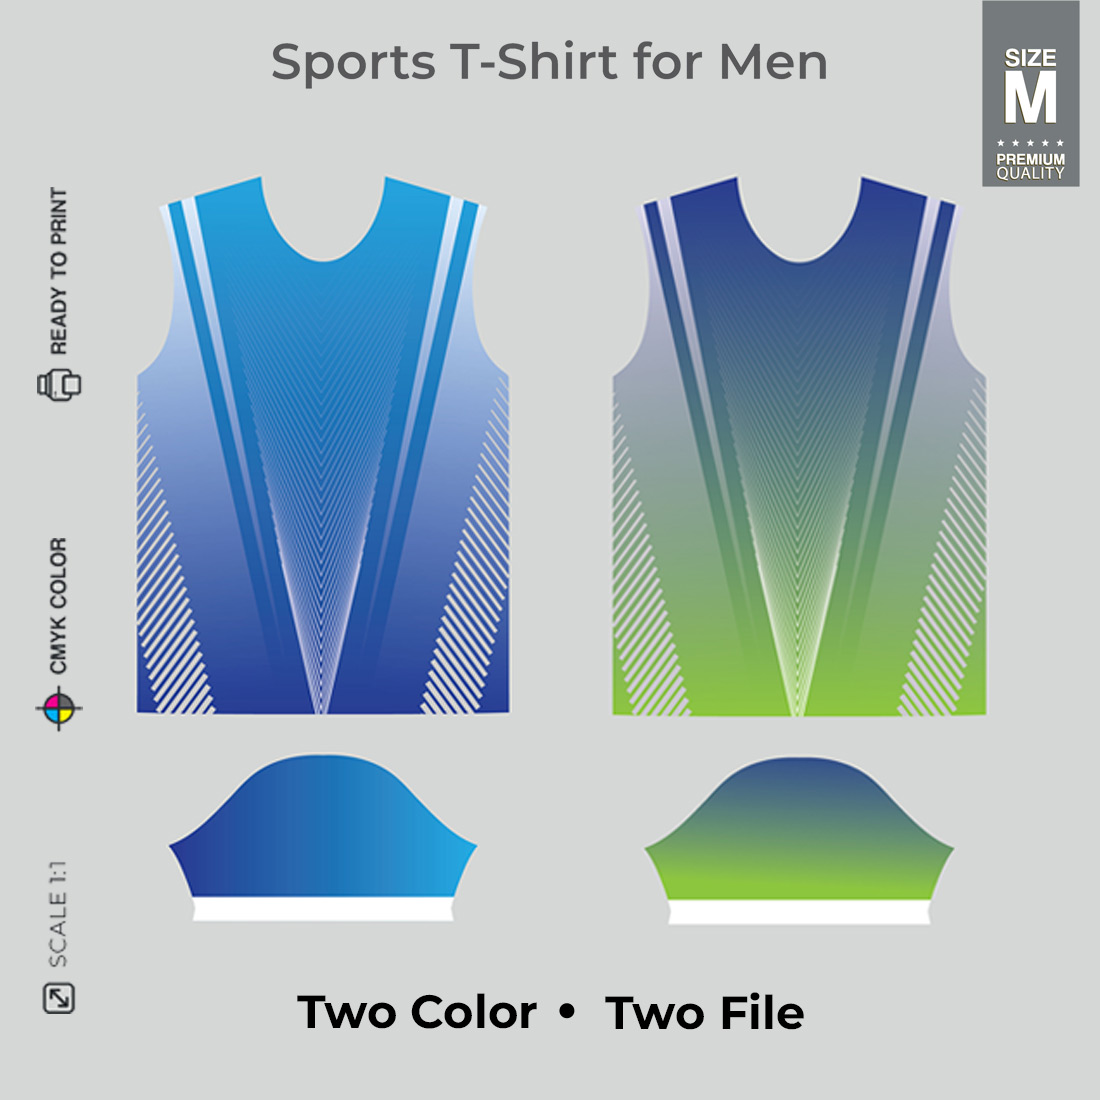 Sports T-shirt Design for man cover image.